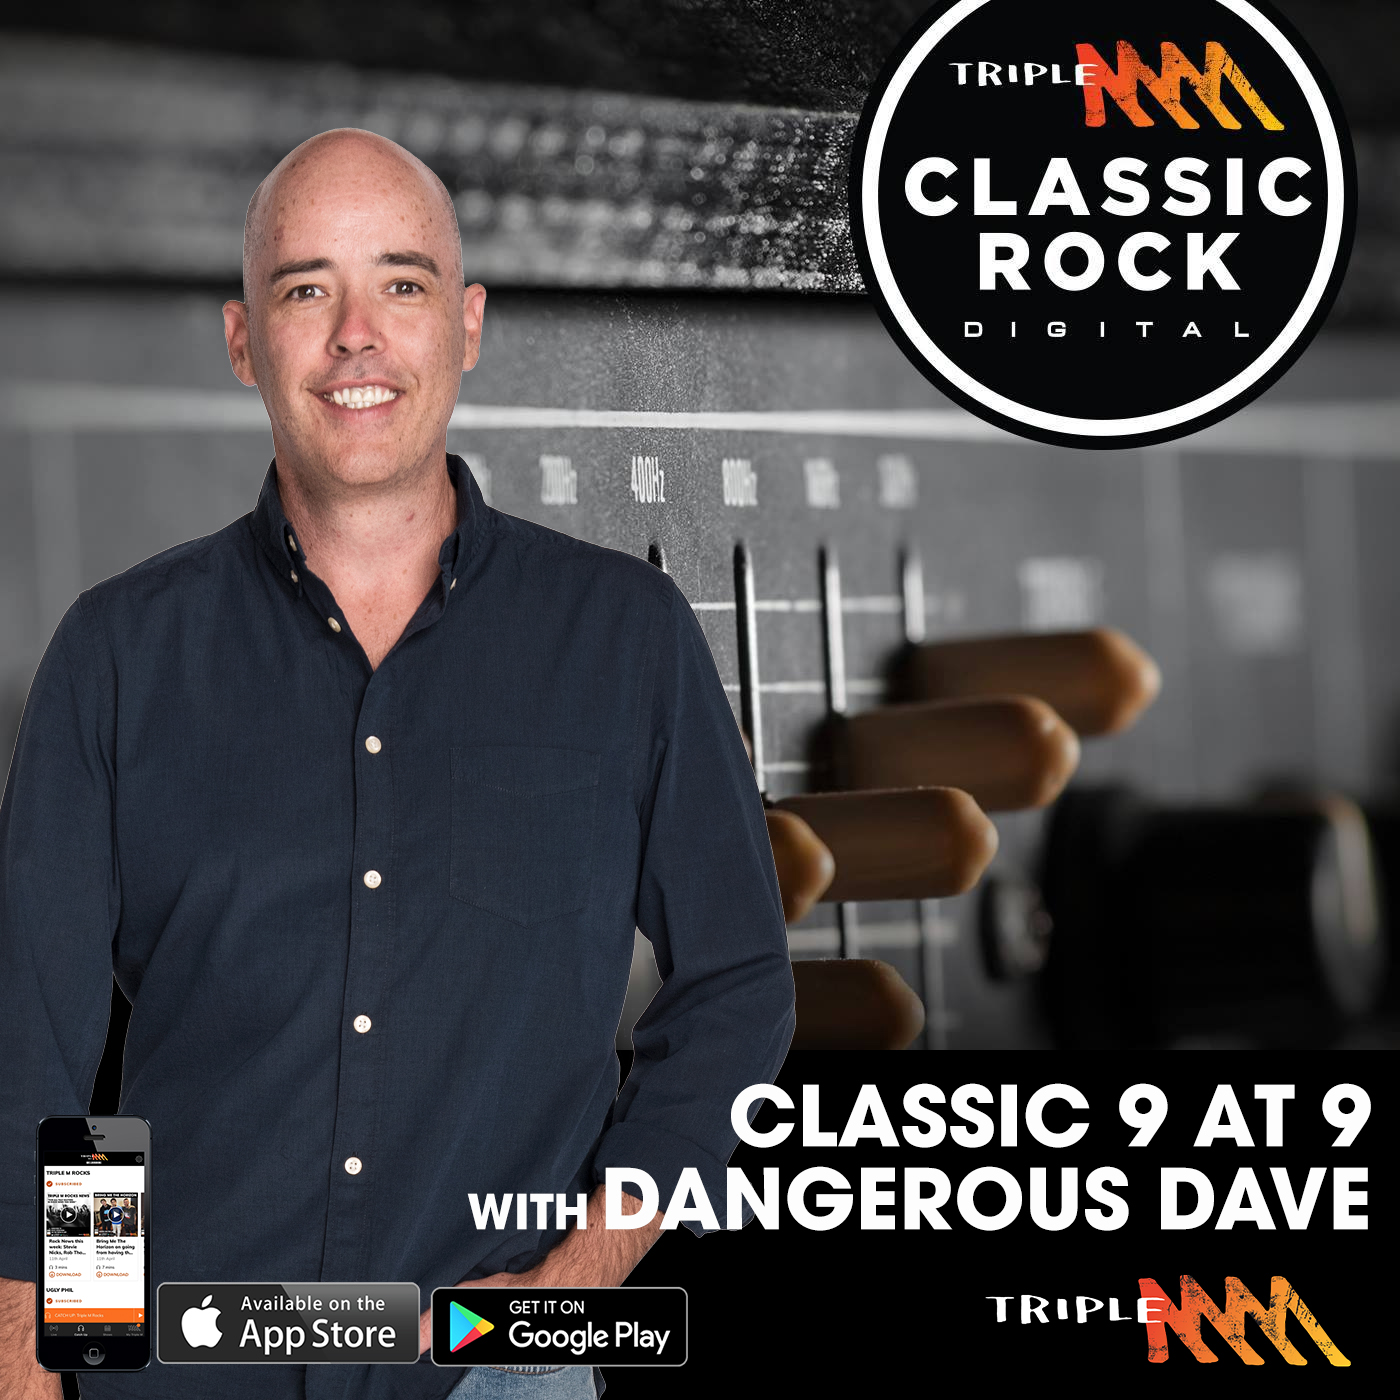 On this day in rock: November 15, Classic 9 at 9 with Dangerous Dave